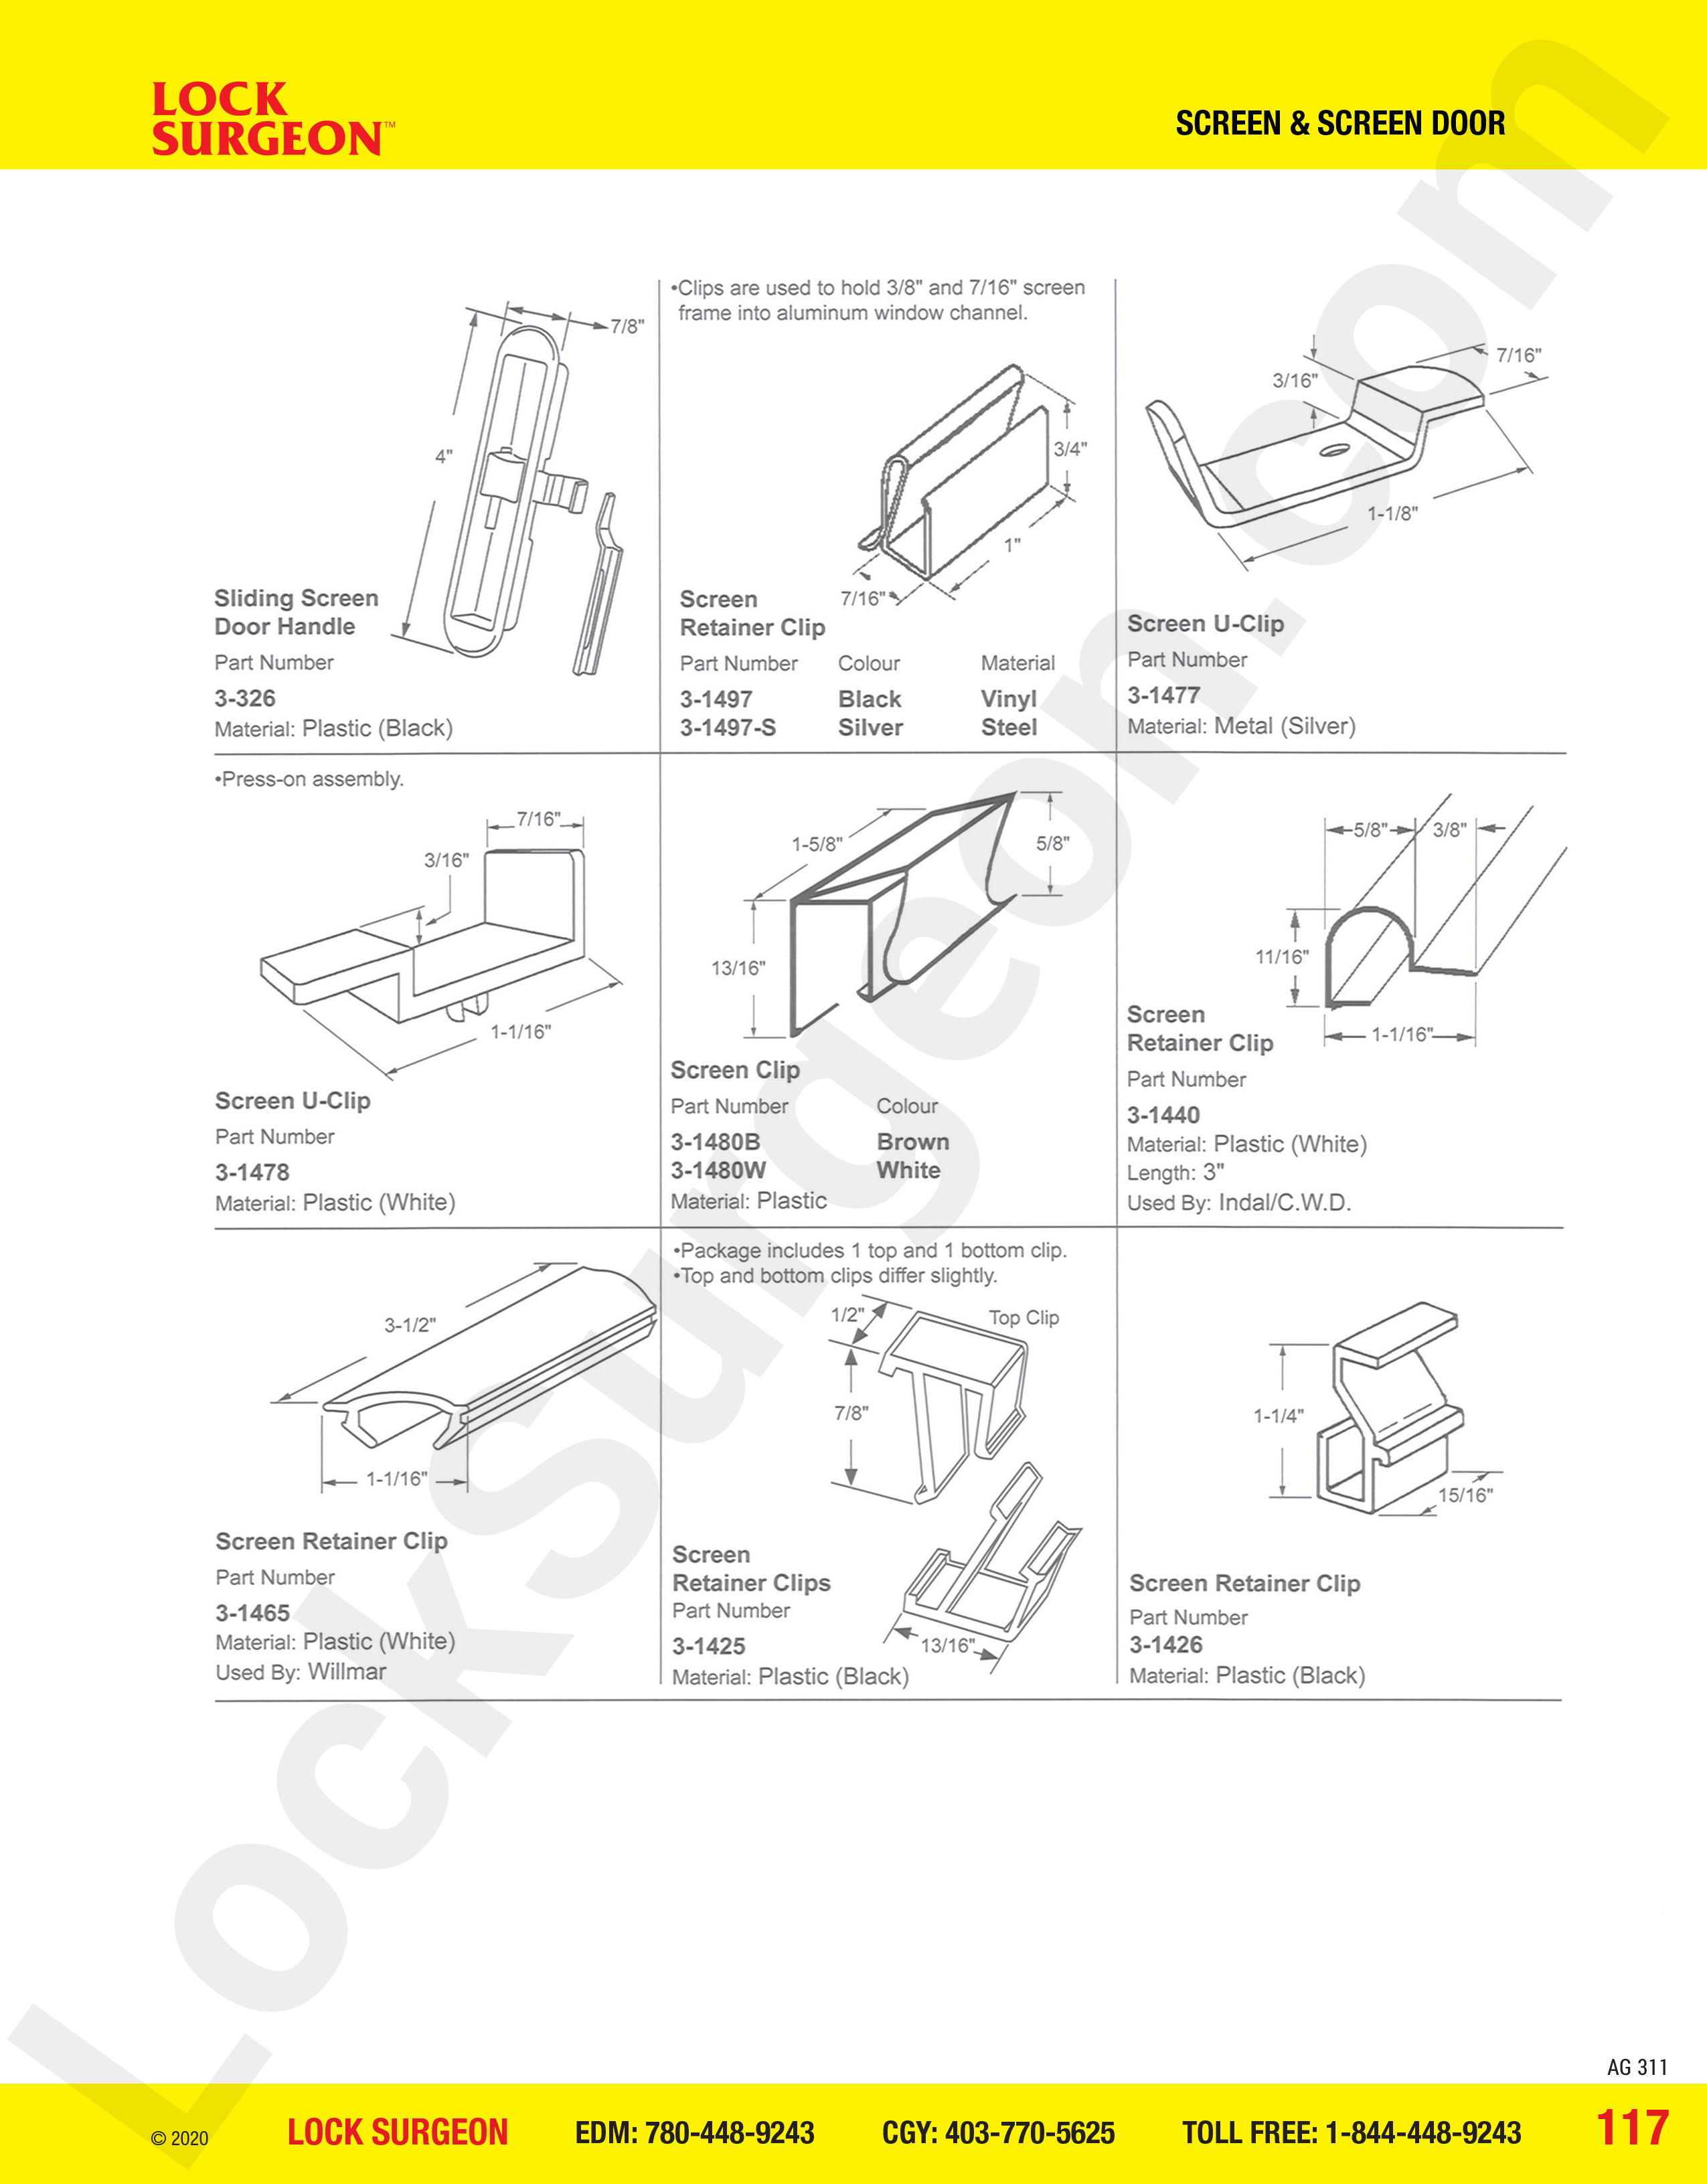 Lock Surgeon Edmonton South Screen retainer clips, U-clips in metal or plastic for Indal-C.W.C.